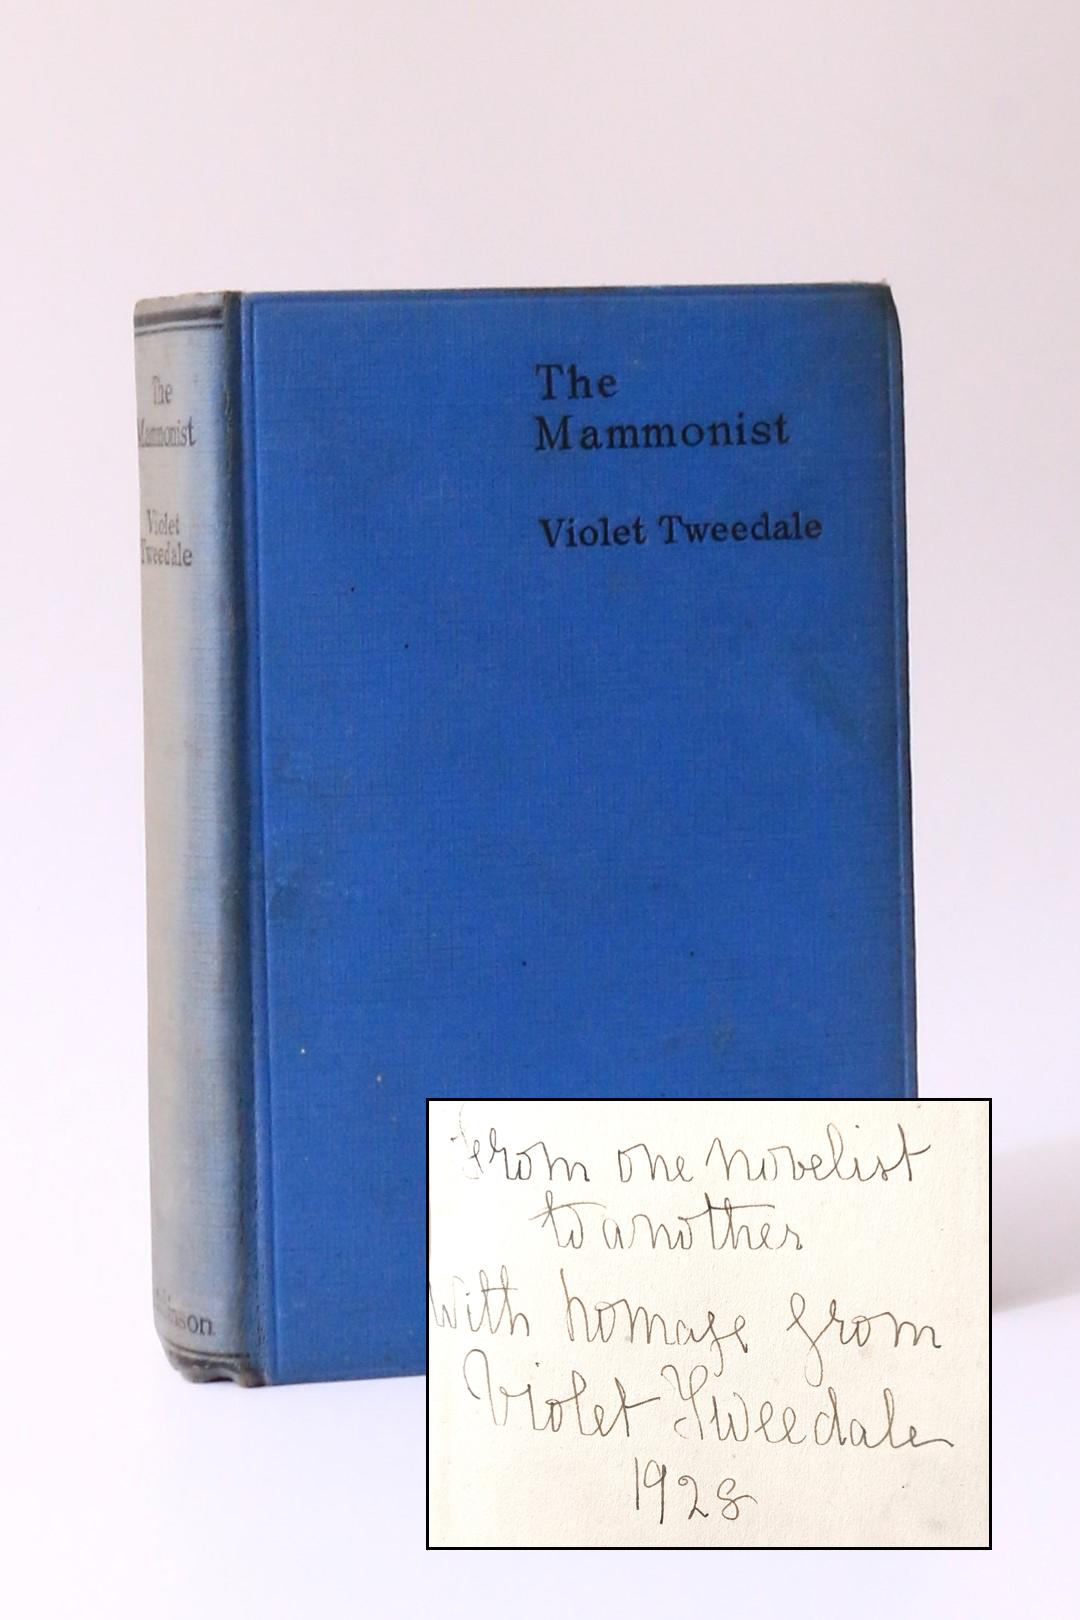 Violet Tweedale - The Mammonist - Hutchinson, n.d. [1927], Signed First Edition.